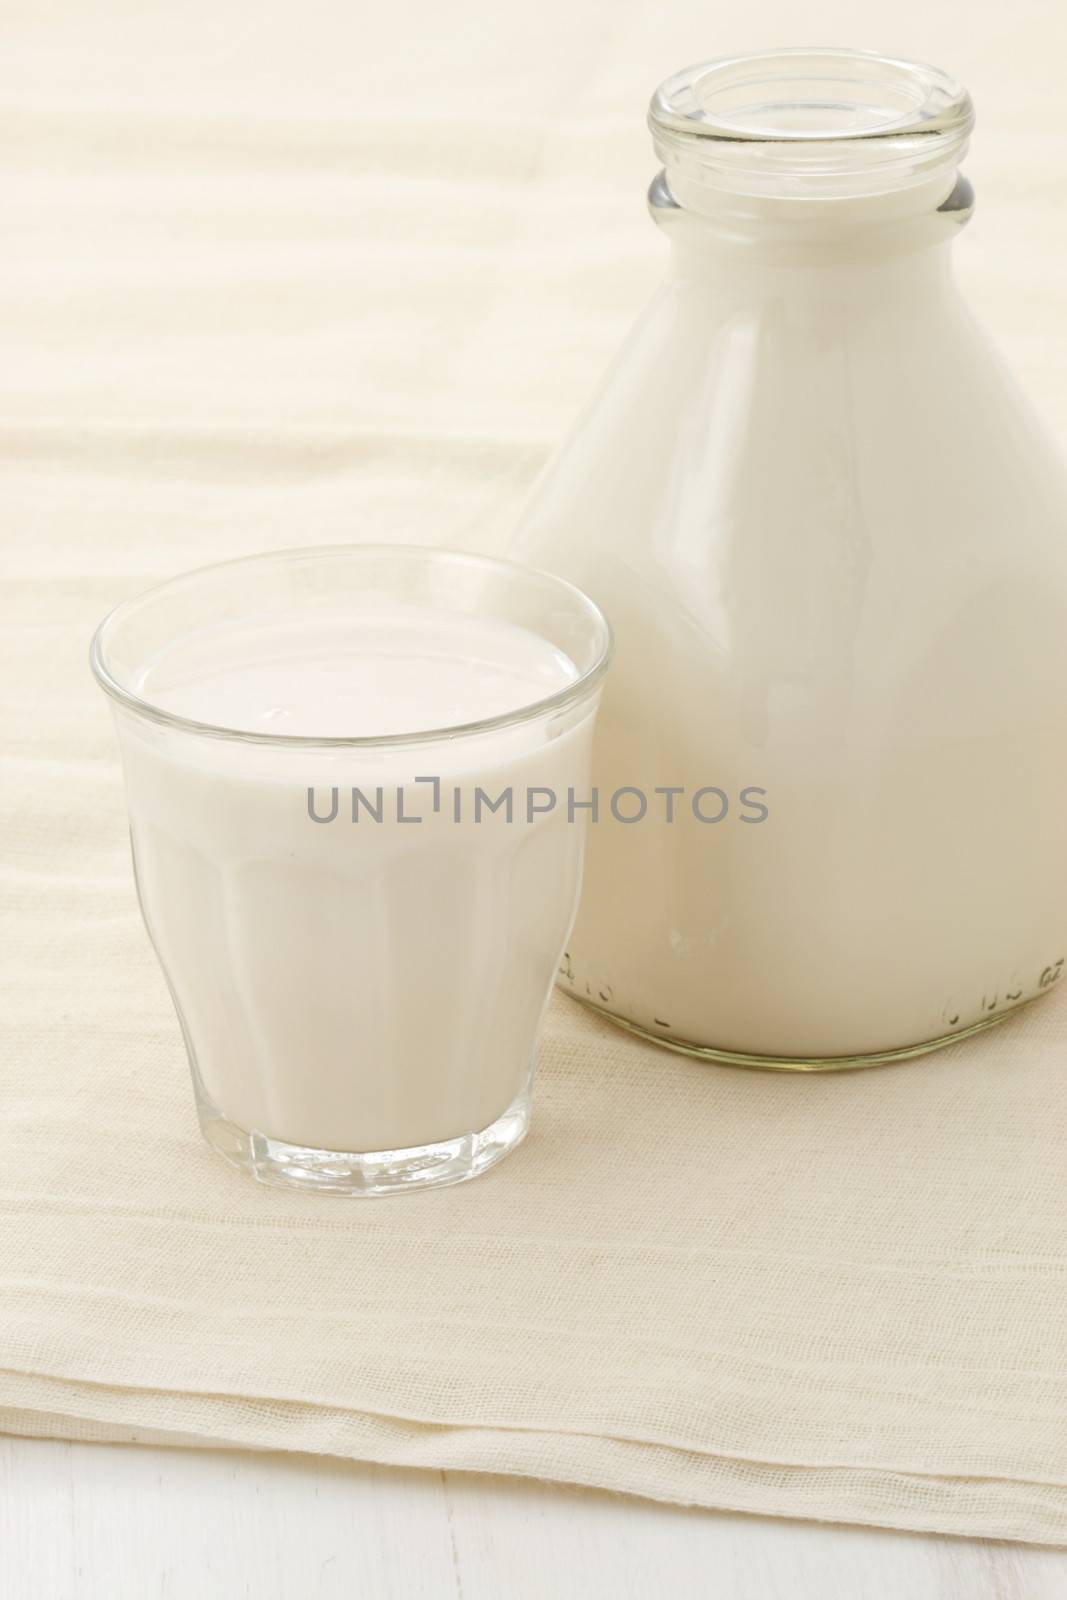 fresh, healthy soy milk on beautiful cheese cloth, nutritious and delicious milk substitute.